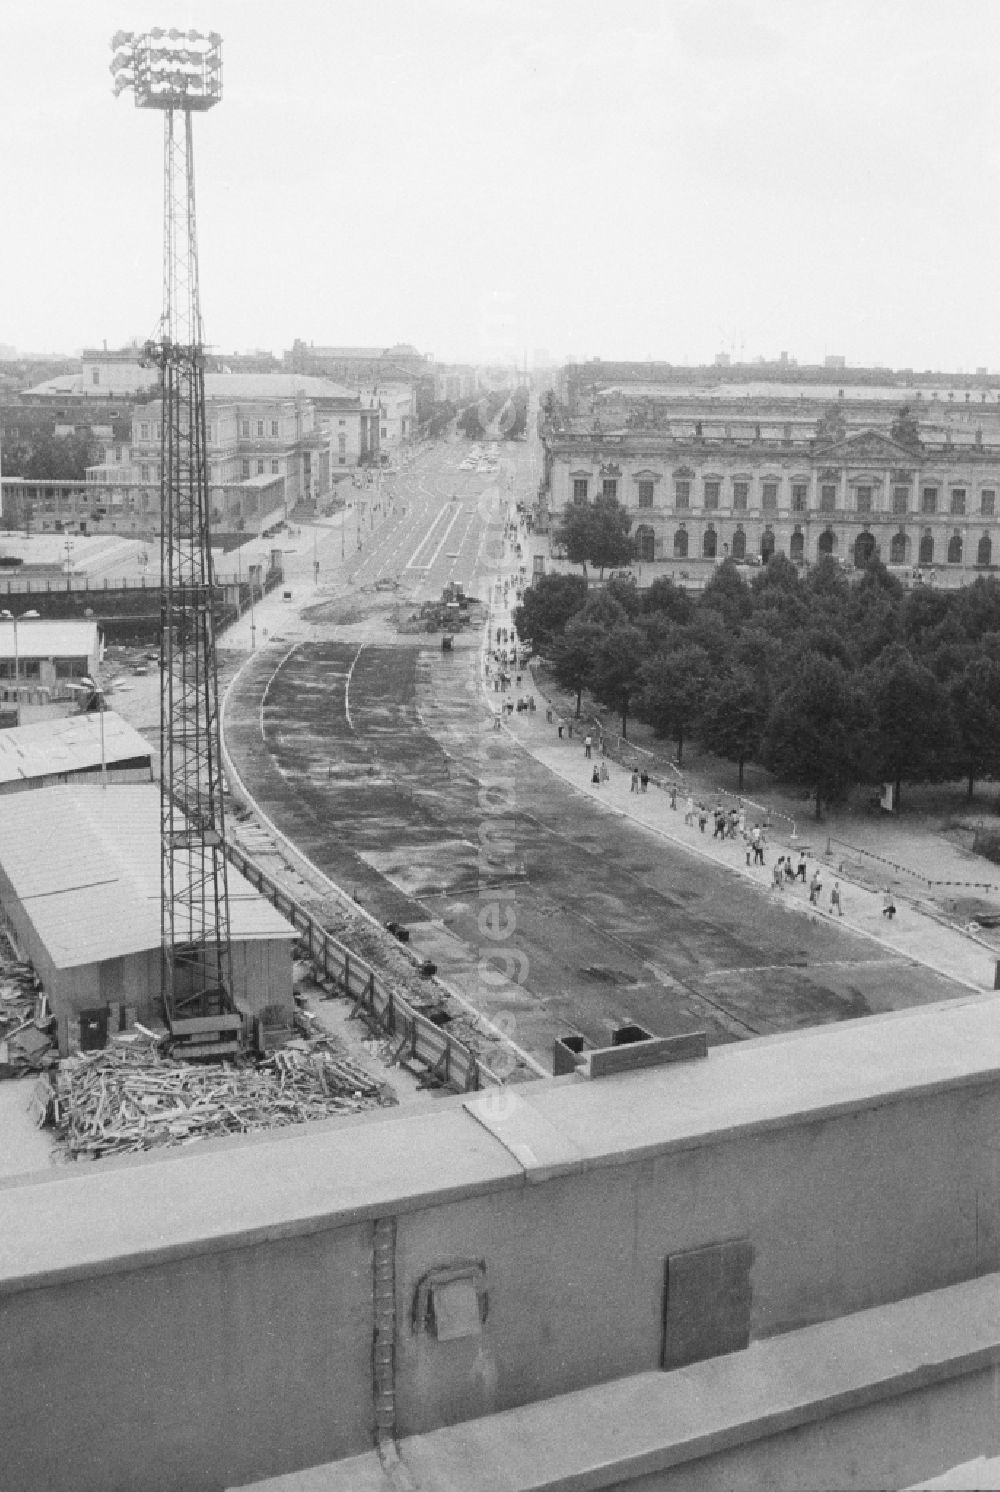 GDR picture archive: Berlin - View from the Palace of the Republic in the direction of Unter der Linden in Berlin, the former capital of the GDR, the German Democratic Republic. Links Ministry of Foreign Affairs, the Crown Prince's Palace and the State Opera. Right the armory